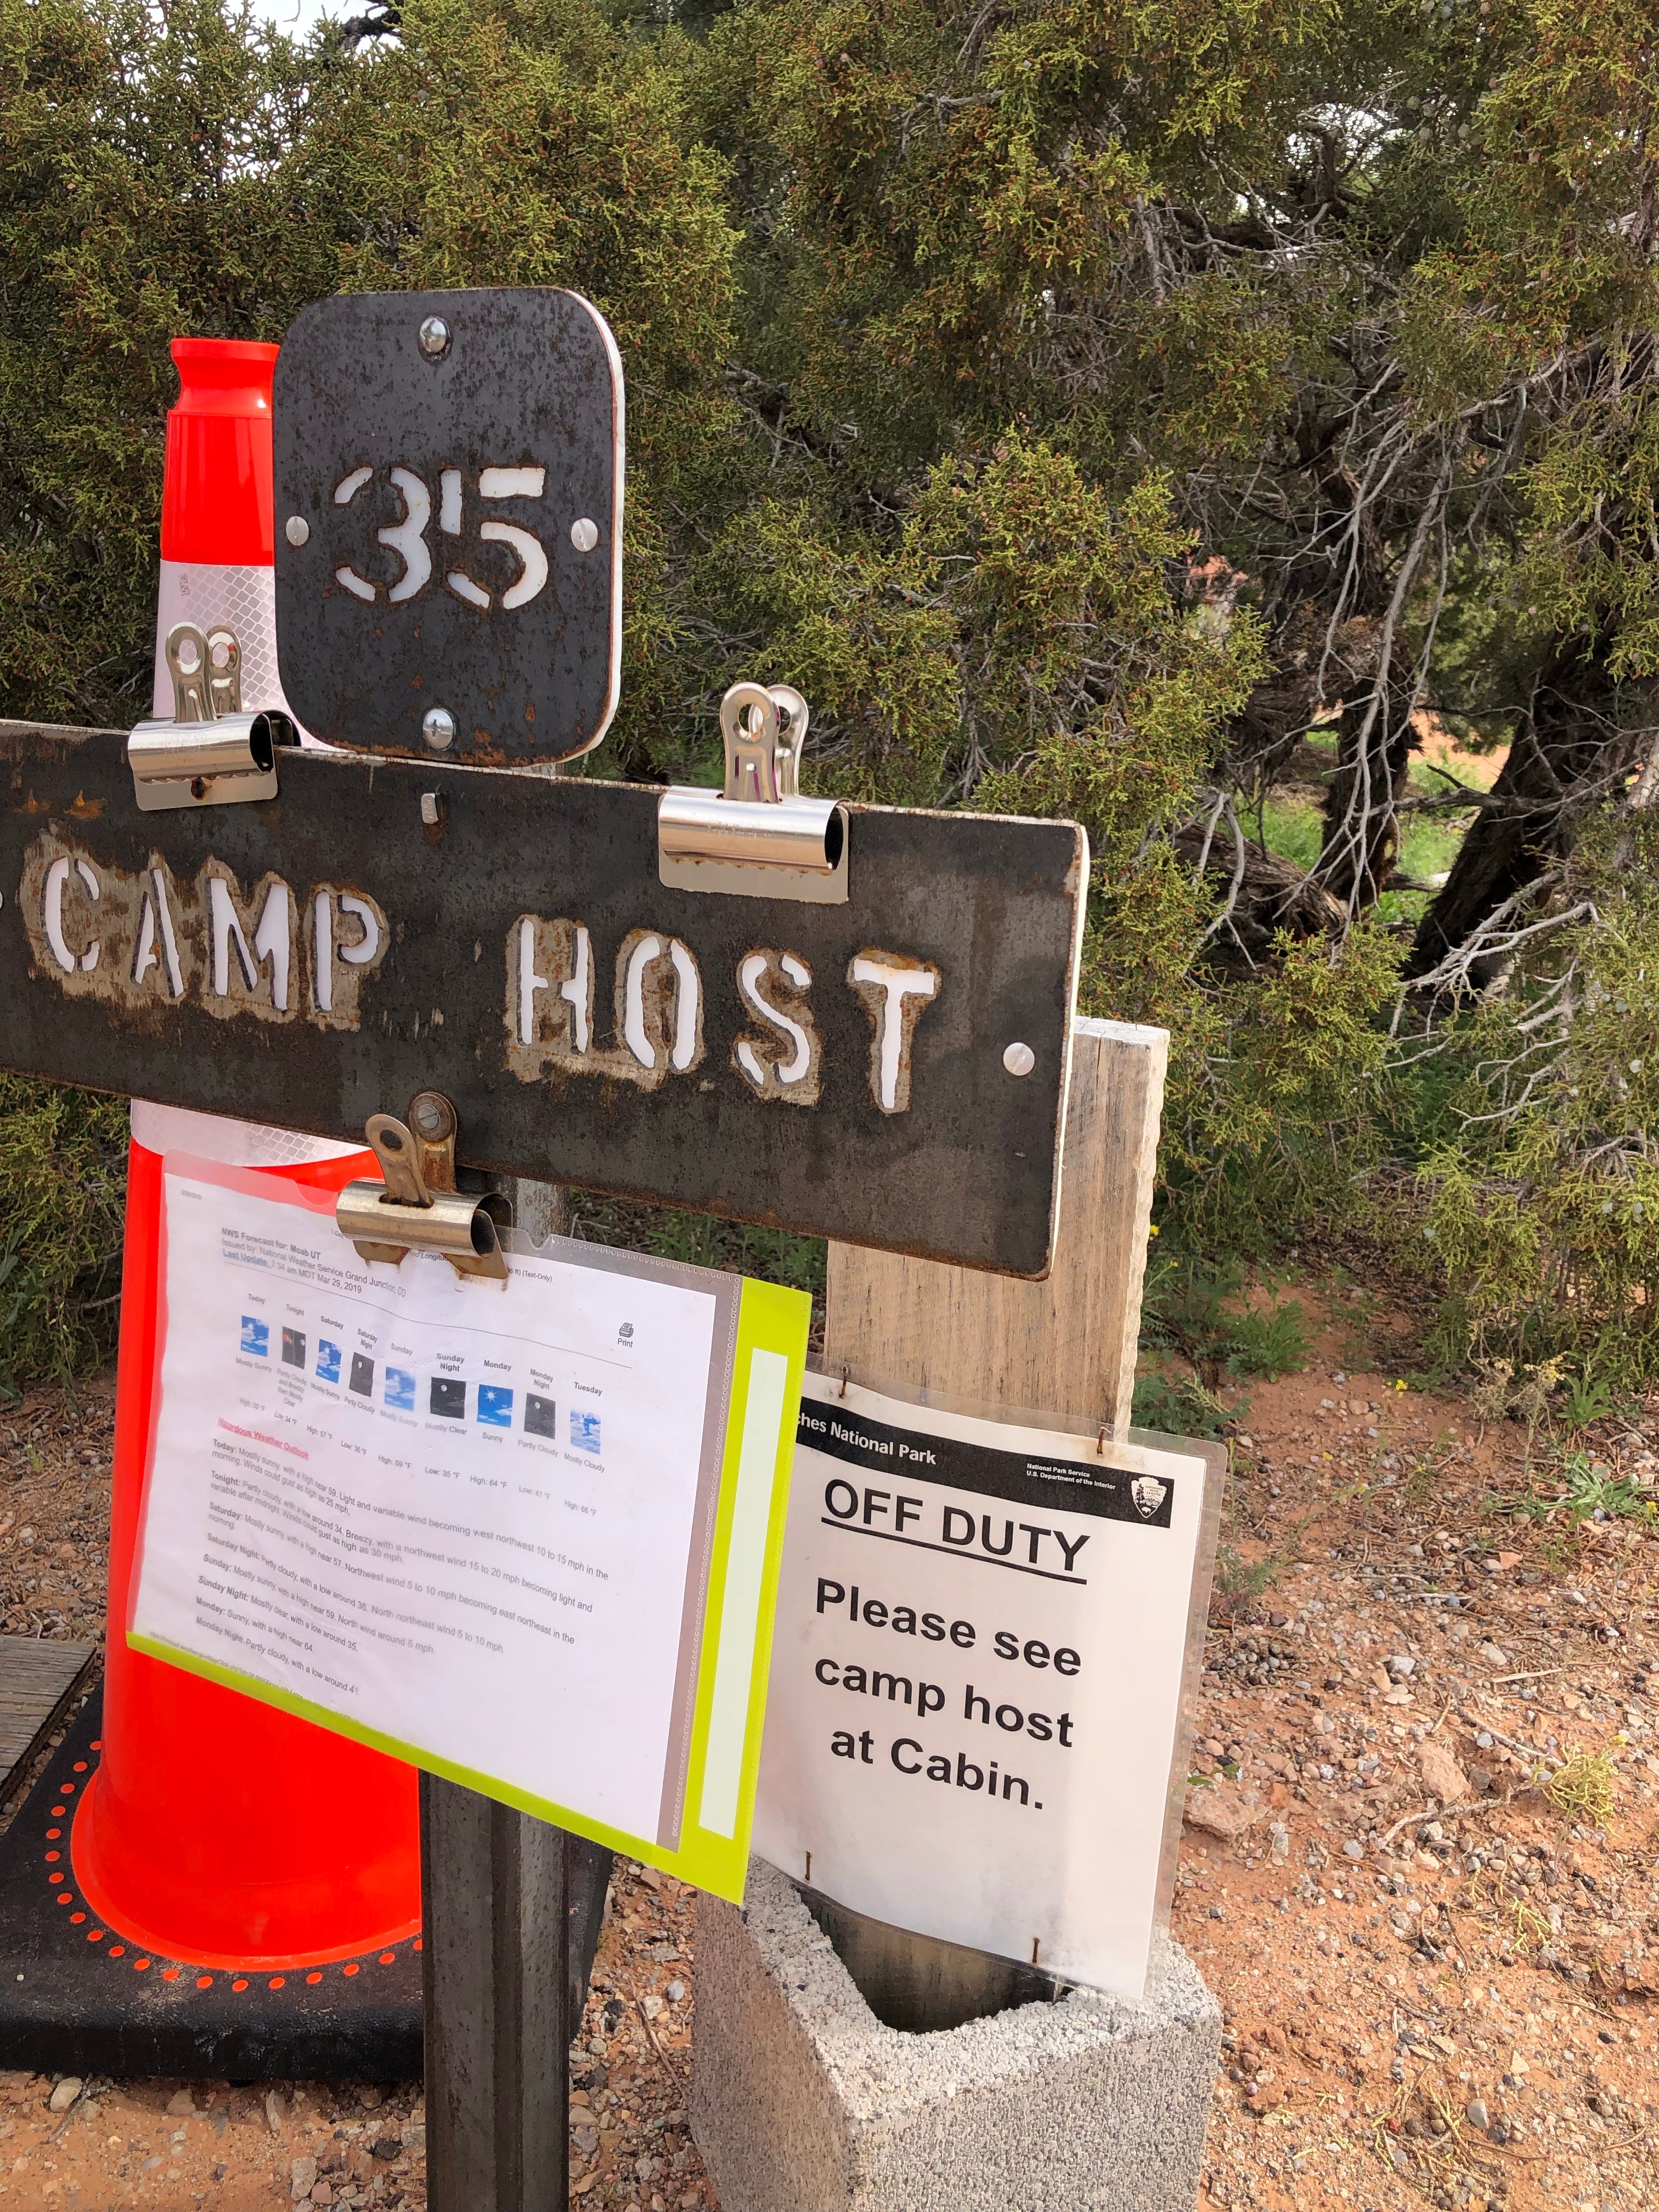 Camp host site empty for entire stay (over weekend before Easter)